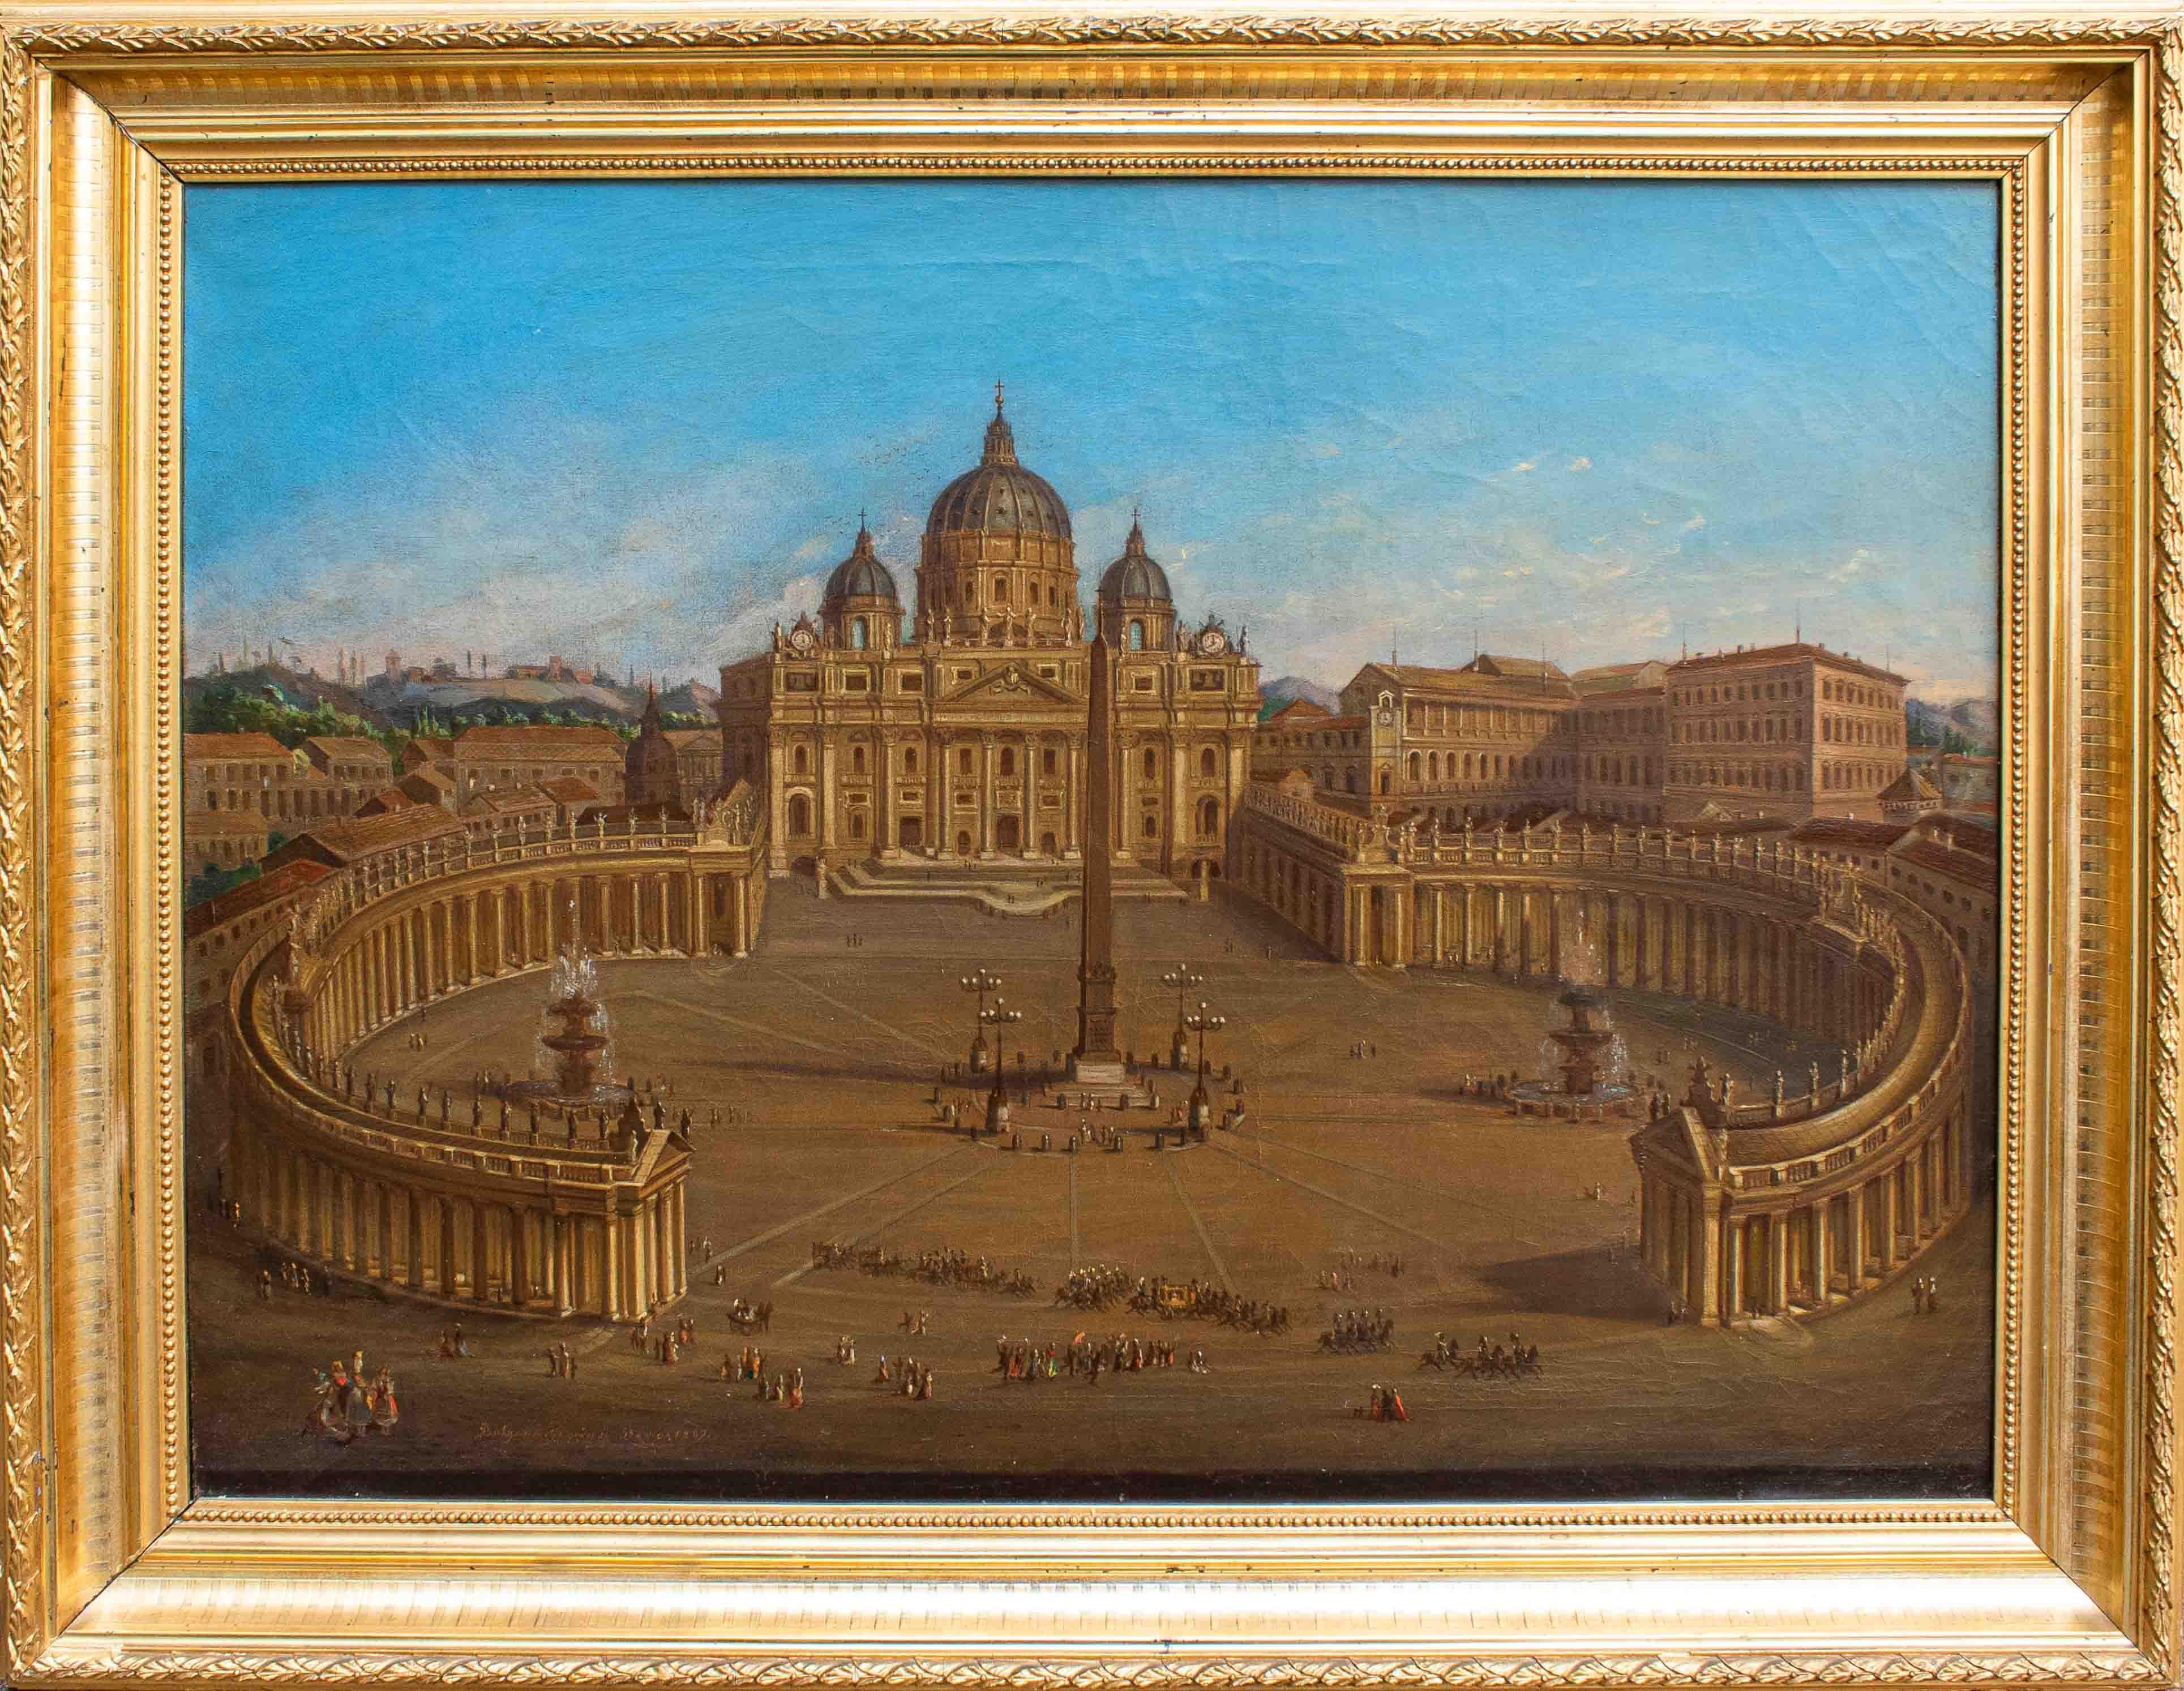 Joseph Bolzern (1828 -1901)

St. Peter's Basilica and the colonnade in front of it

Oil on canvas, 53.5 × 70.5 cm

with frame, 67.5 x 85 cm 

Signed and dated at lower left:
Bolzern. J. pinx Rome 1889

An undisputed symbol of Rome's history, St.